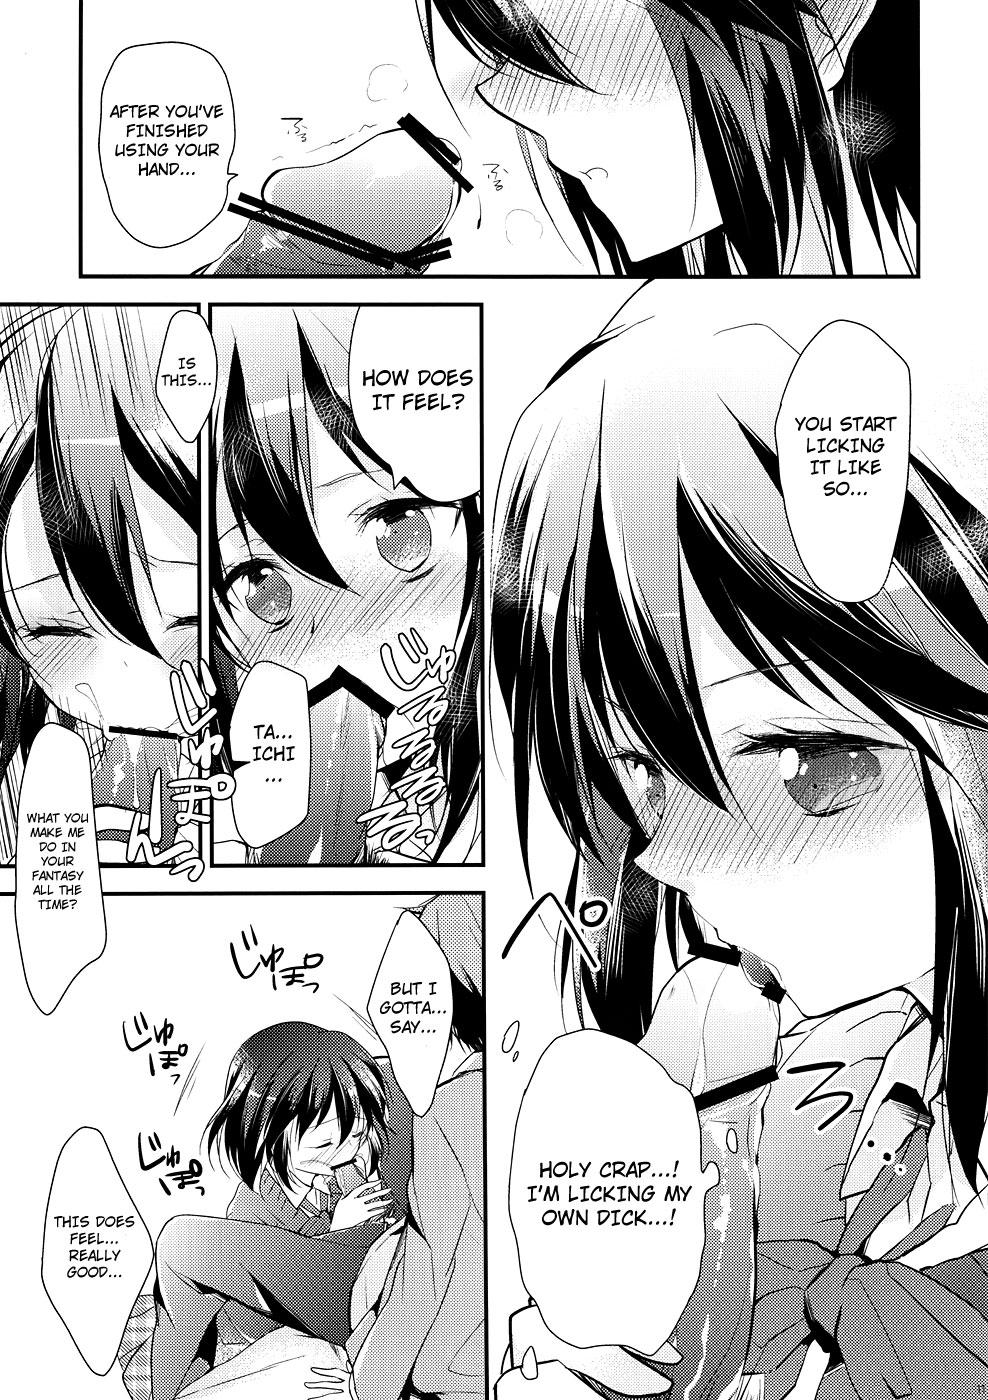 Teenager Shitagokoro Connect | Secret Intention Connect - Kokoro connect Great Fuck - Page 10